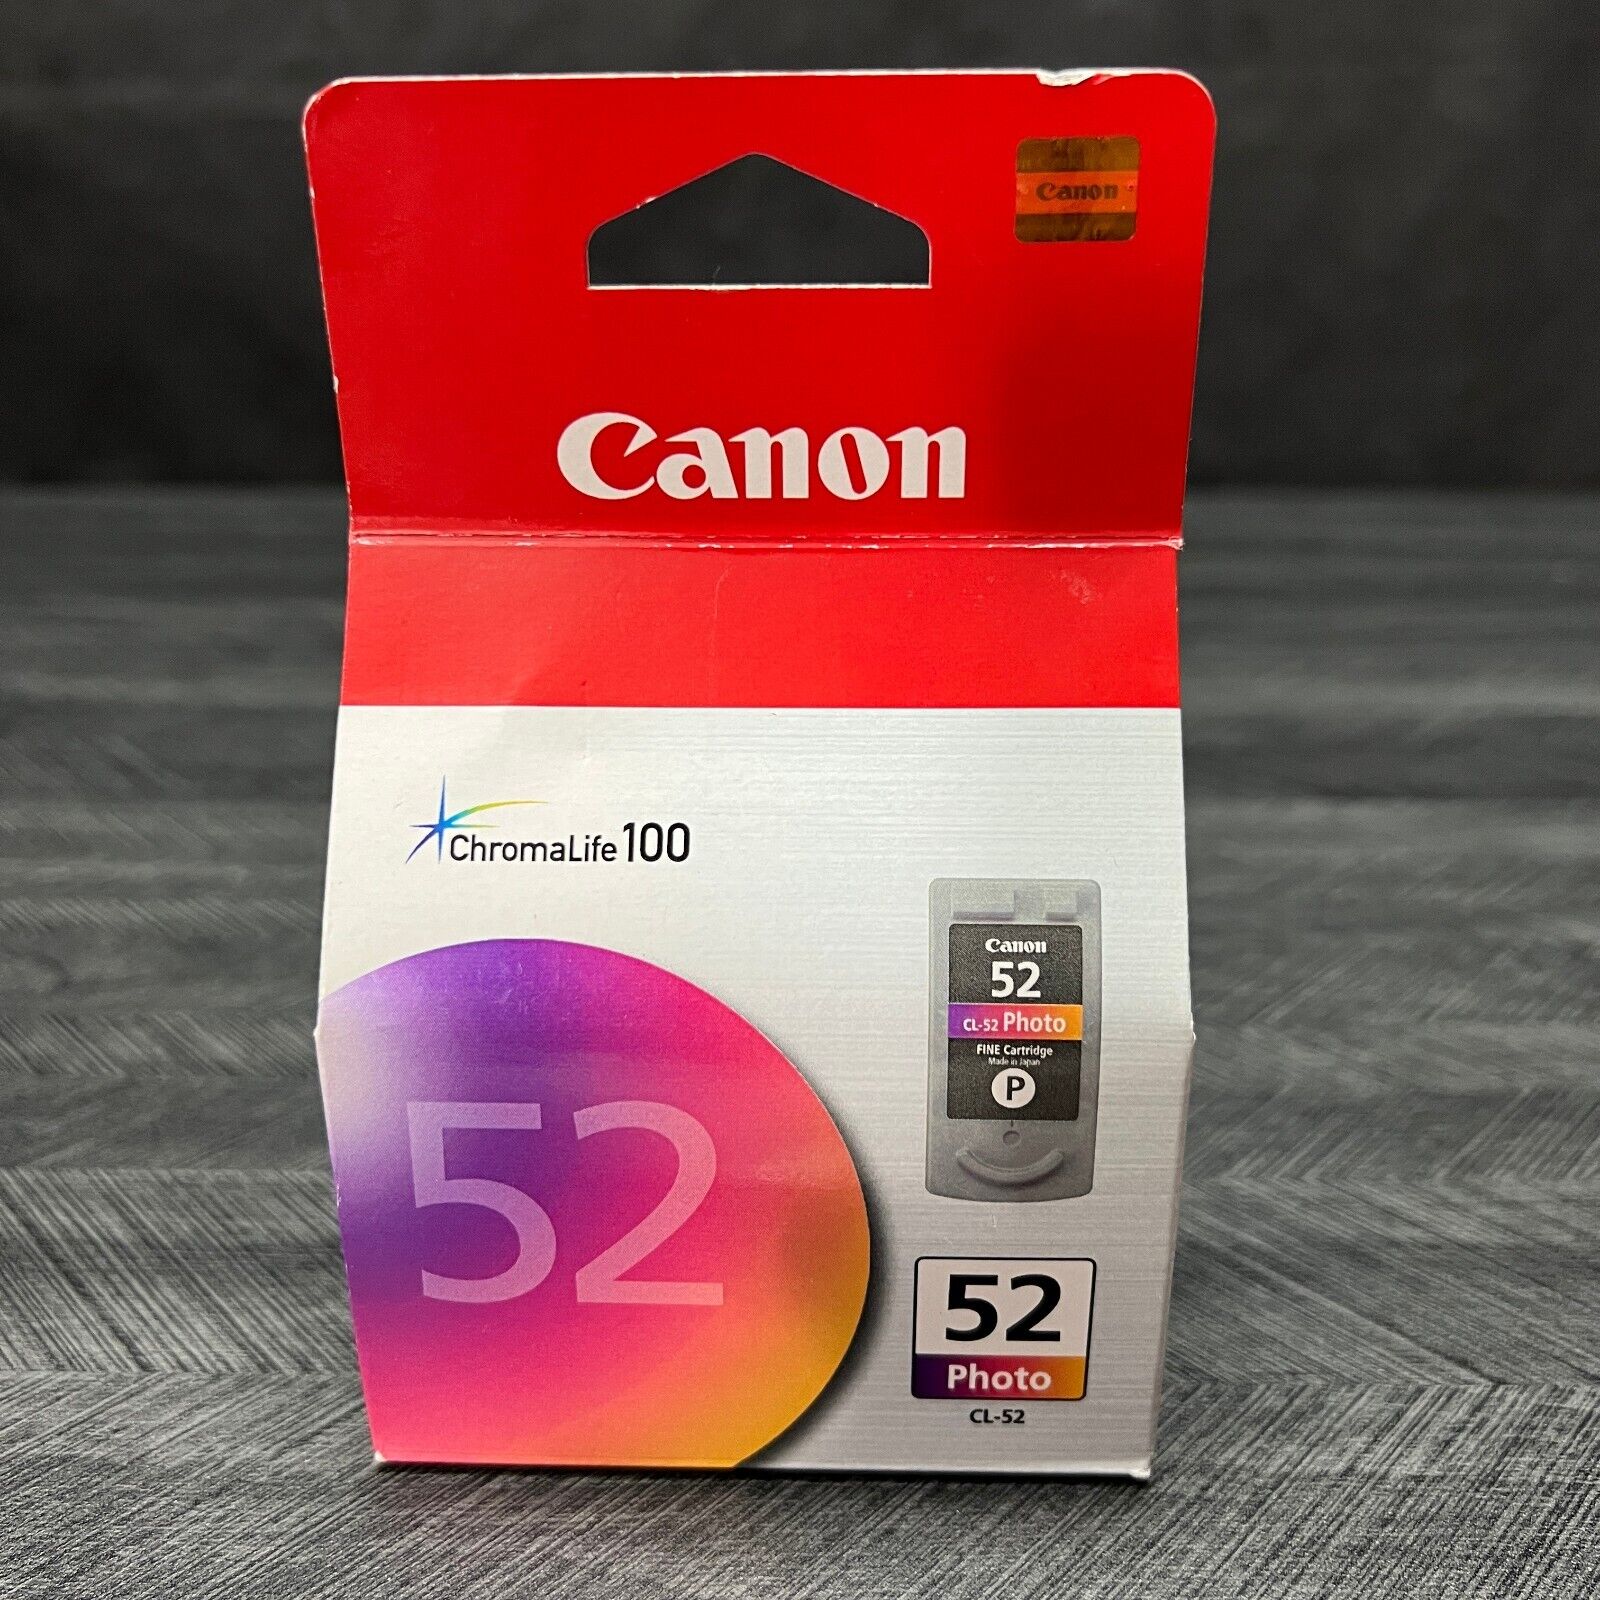 Canon 52  Photo Ink Cartridge CL-52 For Pixma iP6210D & iP6220D New Sealed.